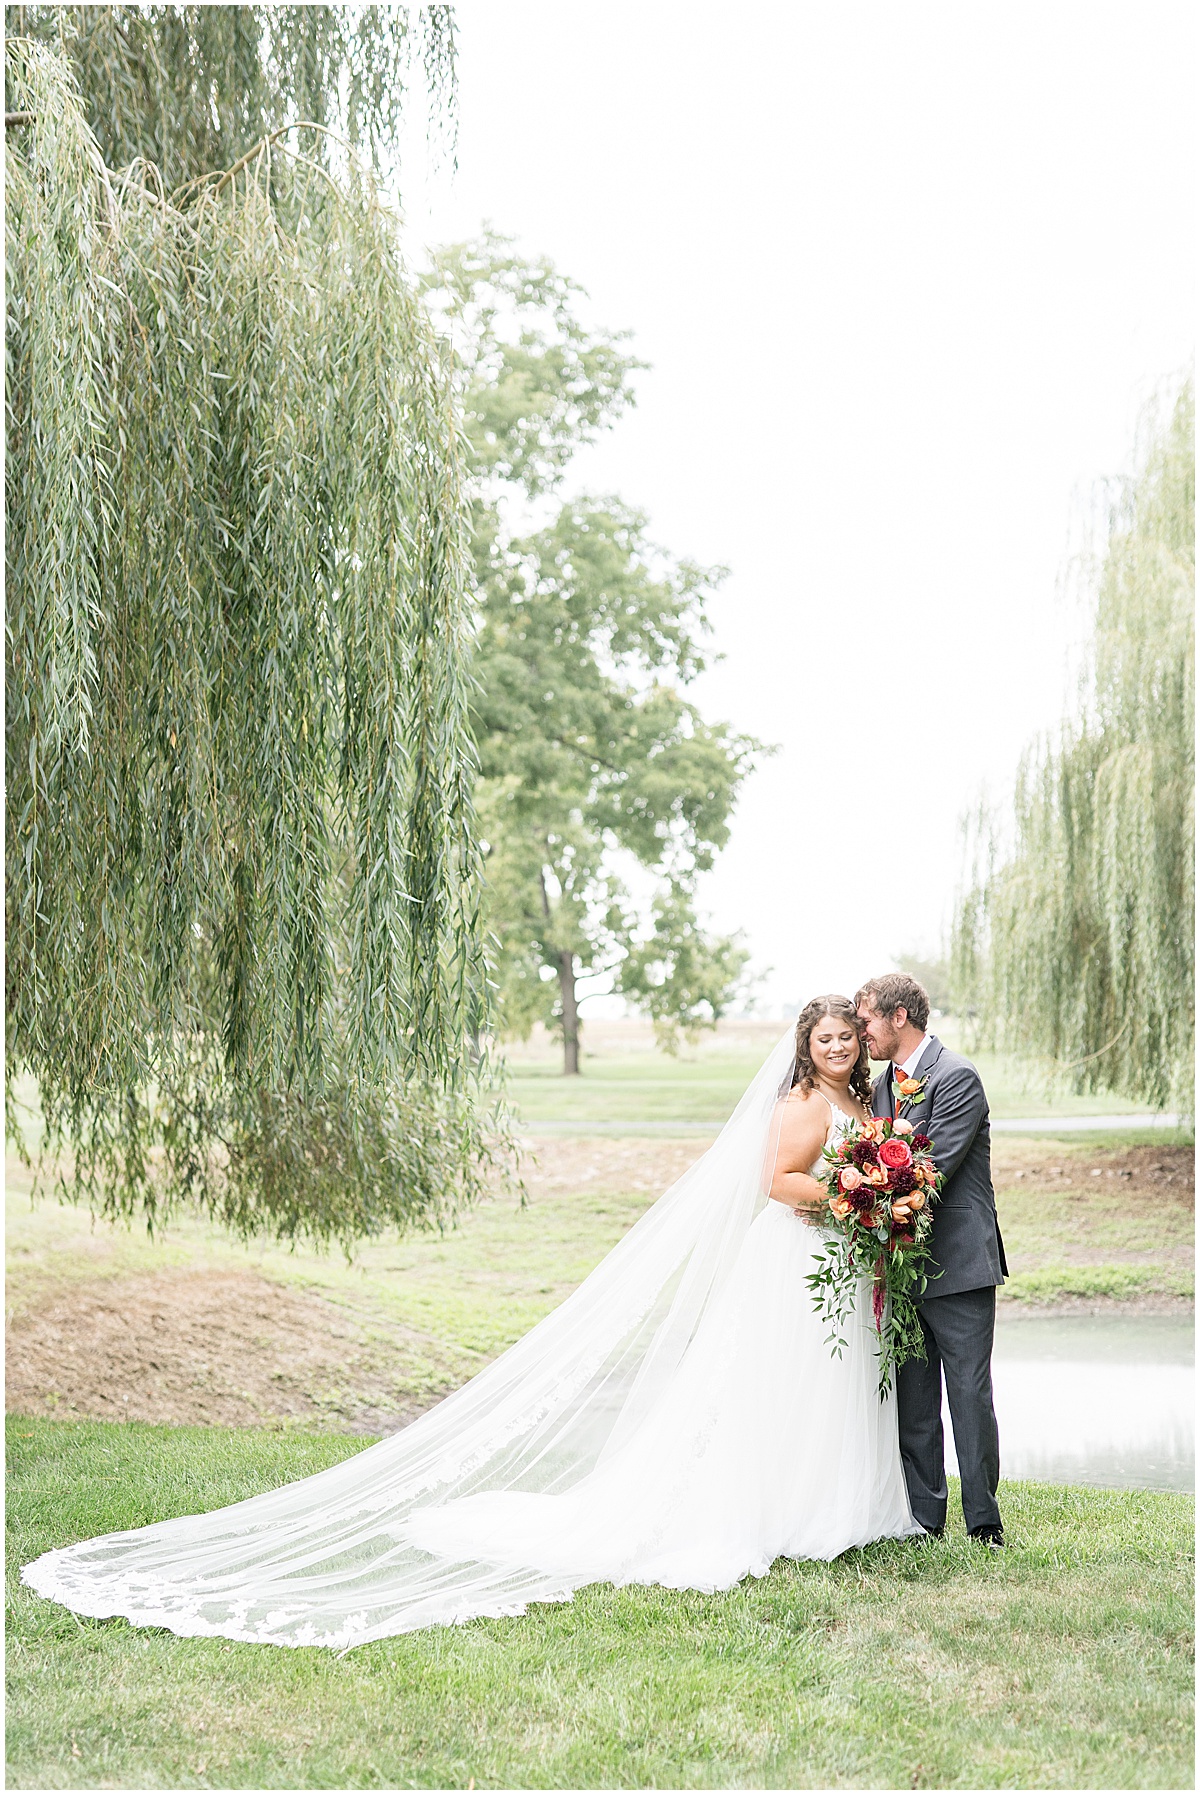 Bride and groom photos at outdoor private property wedding in Frankfort, Indiana by Victoria Rayburn Photography